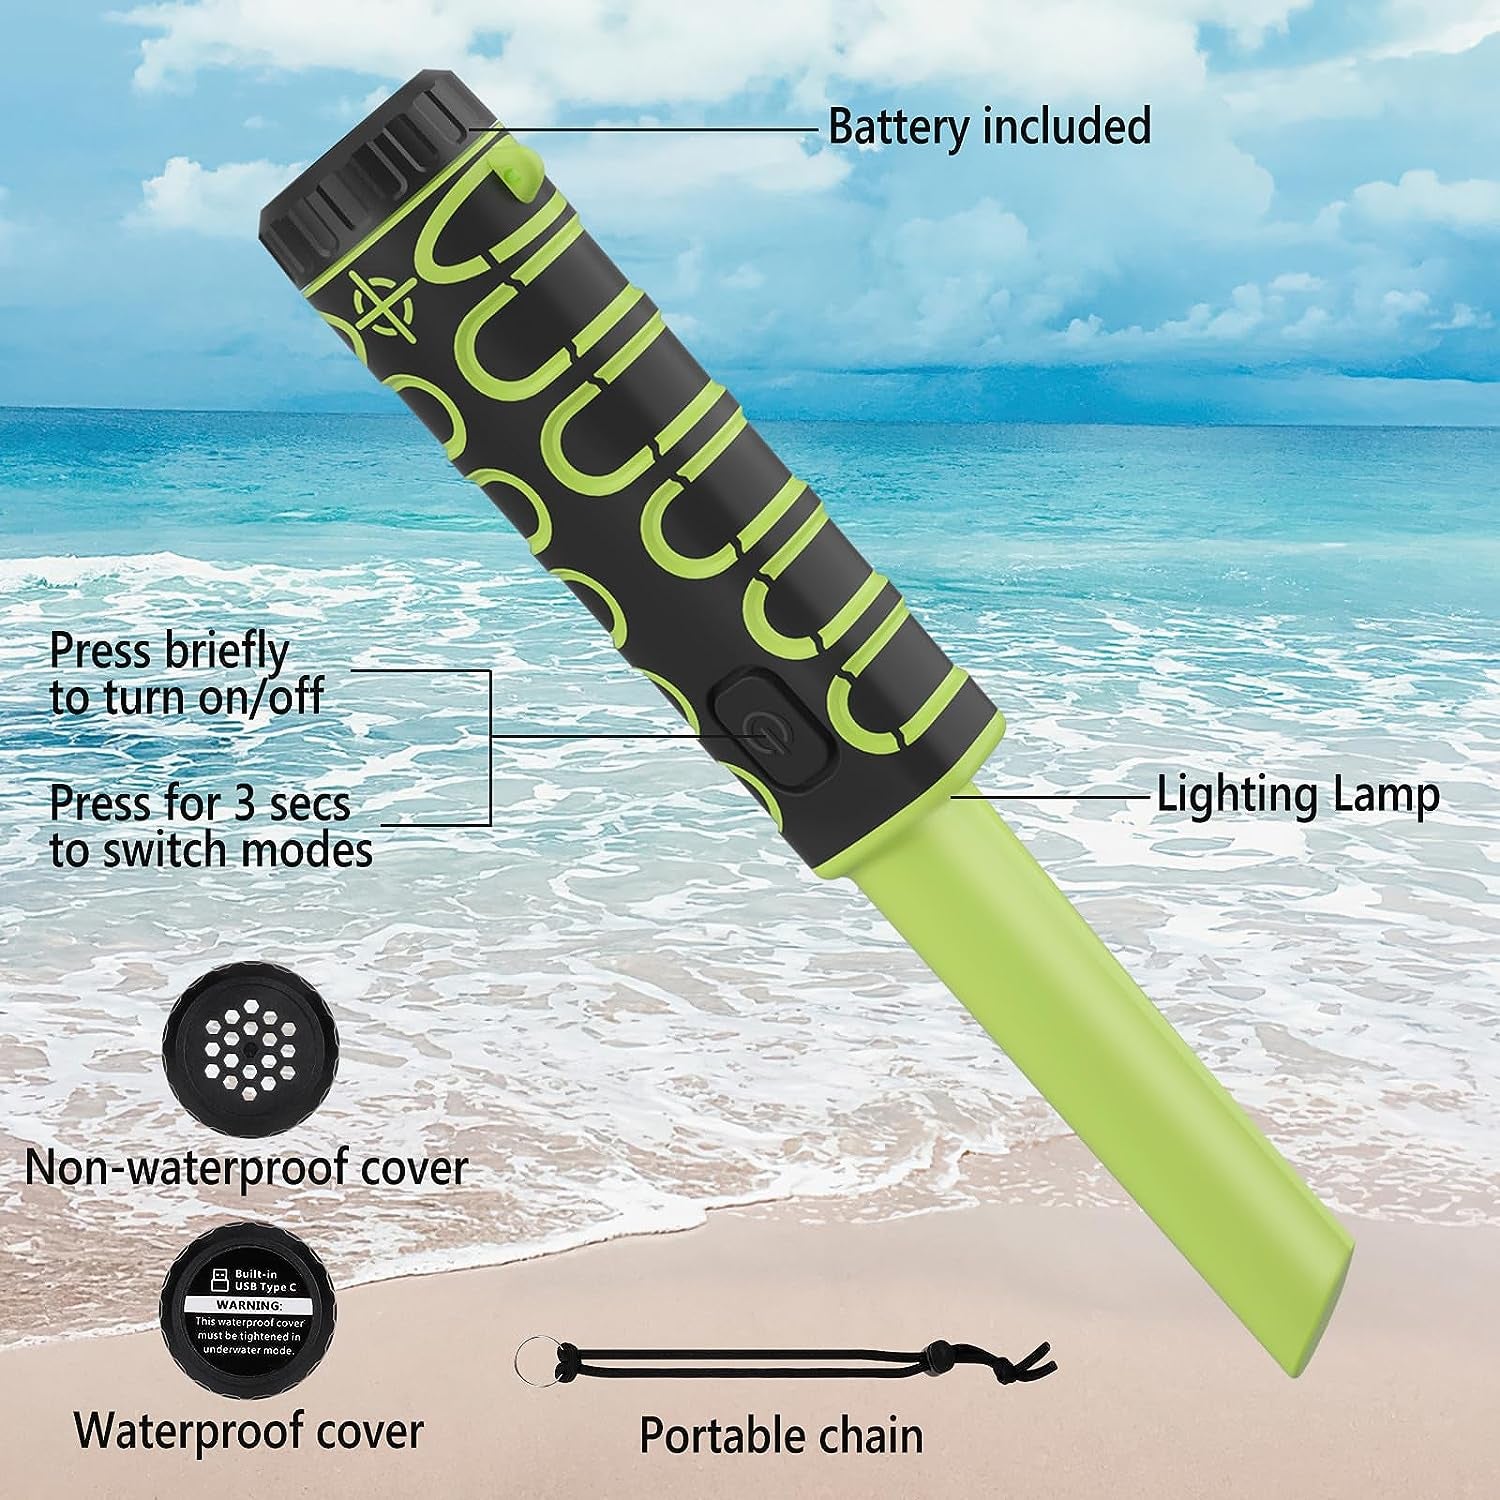 Metal Detector Pinpointer Fully Waterproof IP68, Metal Detector for Adults & Kids up to 50FT Underwater, 3 Modes Handheld Pinpointer Metal Detector with Battery & Holster for Treasure Hunting